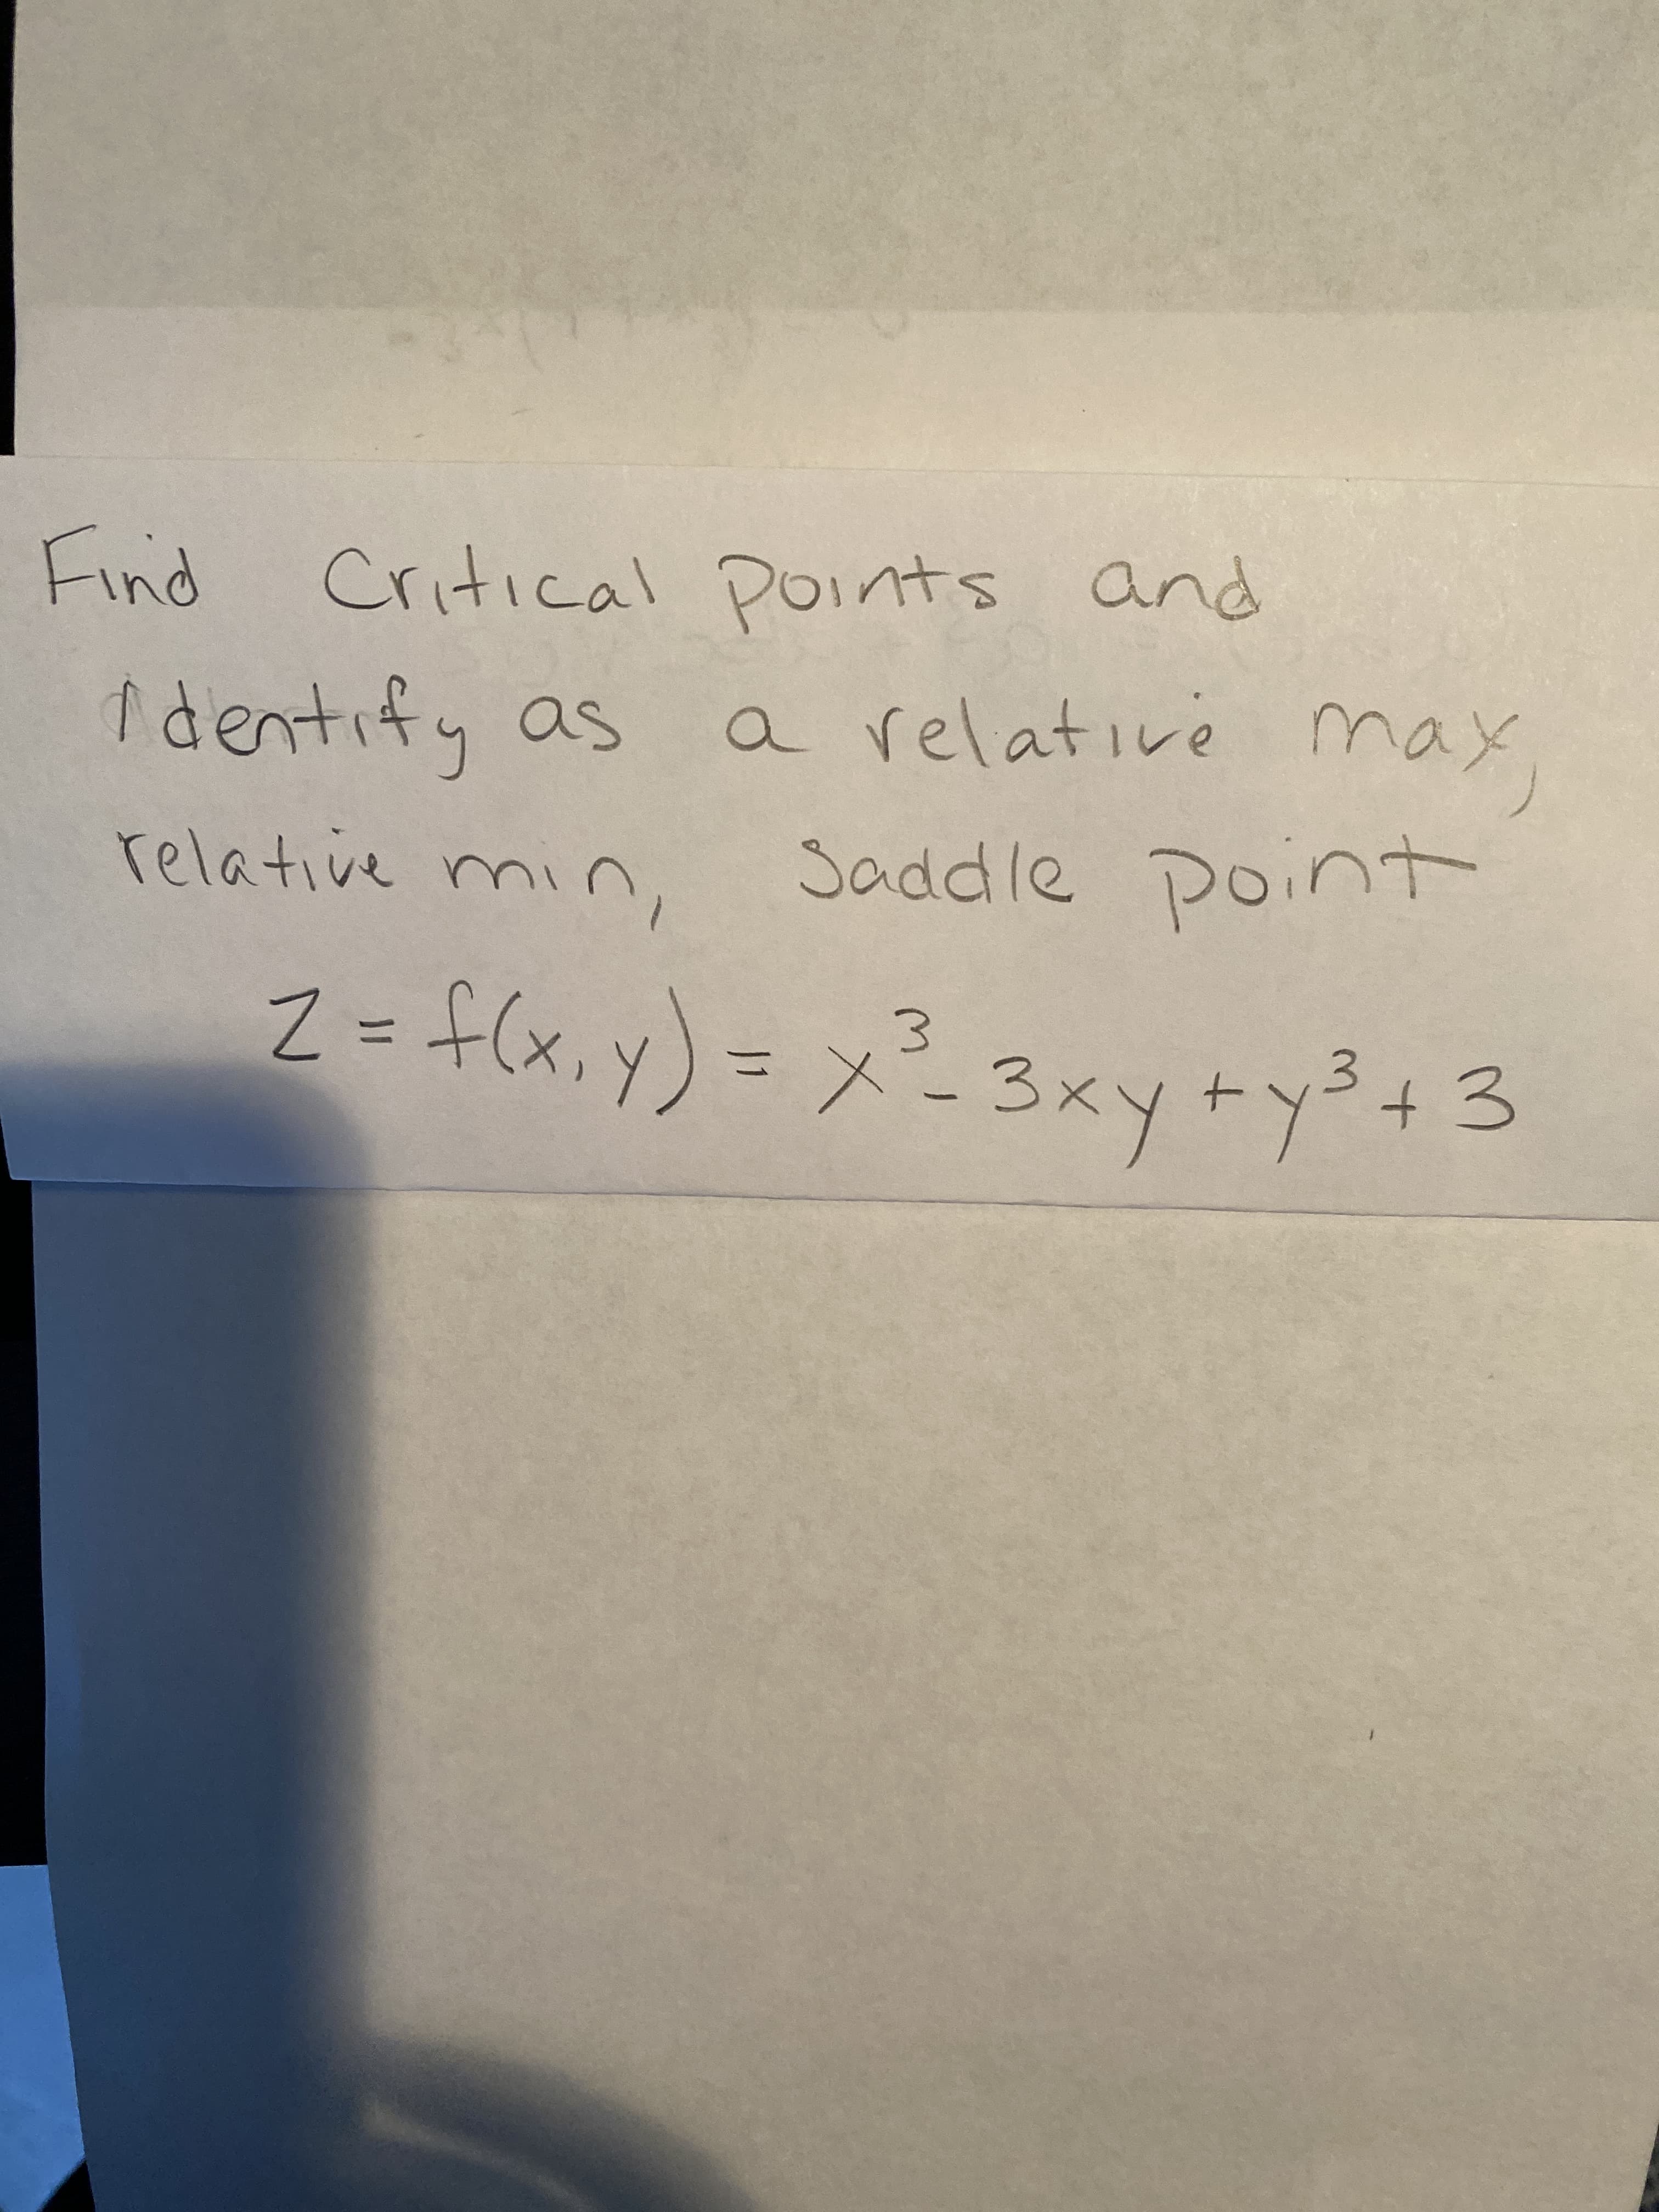 Find Critical points and
1dentify as
relative
a relative max,
Saddle
x)ナ=D Z
y.
3.
3.
ctch+hxsメ = (人
